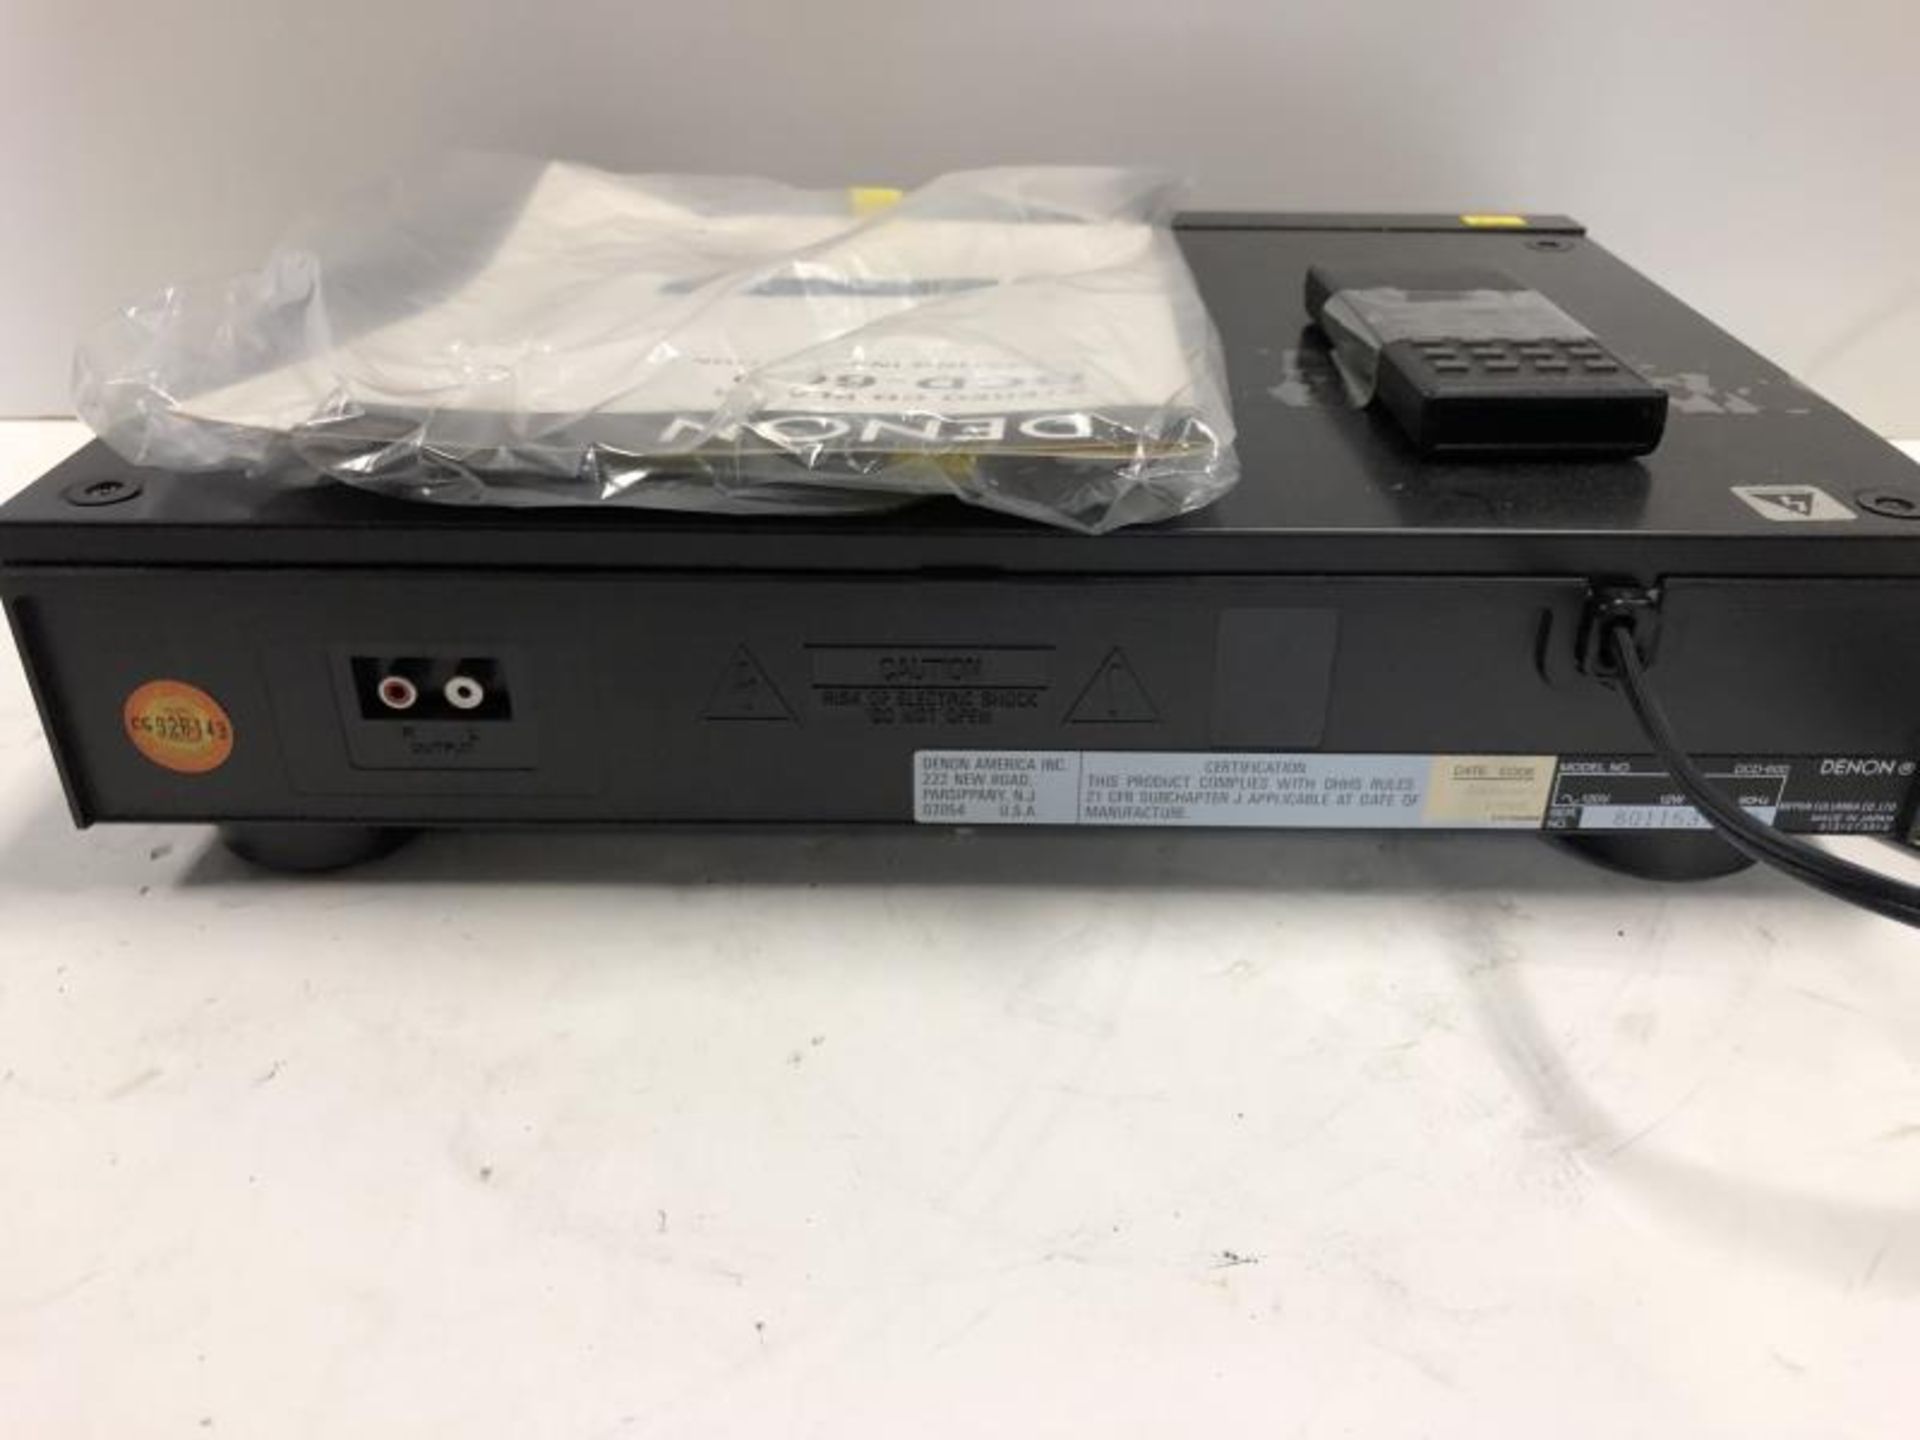 Denon model DCD 600 CD player, with manual and remote, tested - powers up - Image 3 of 7